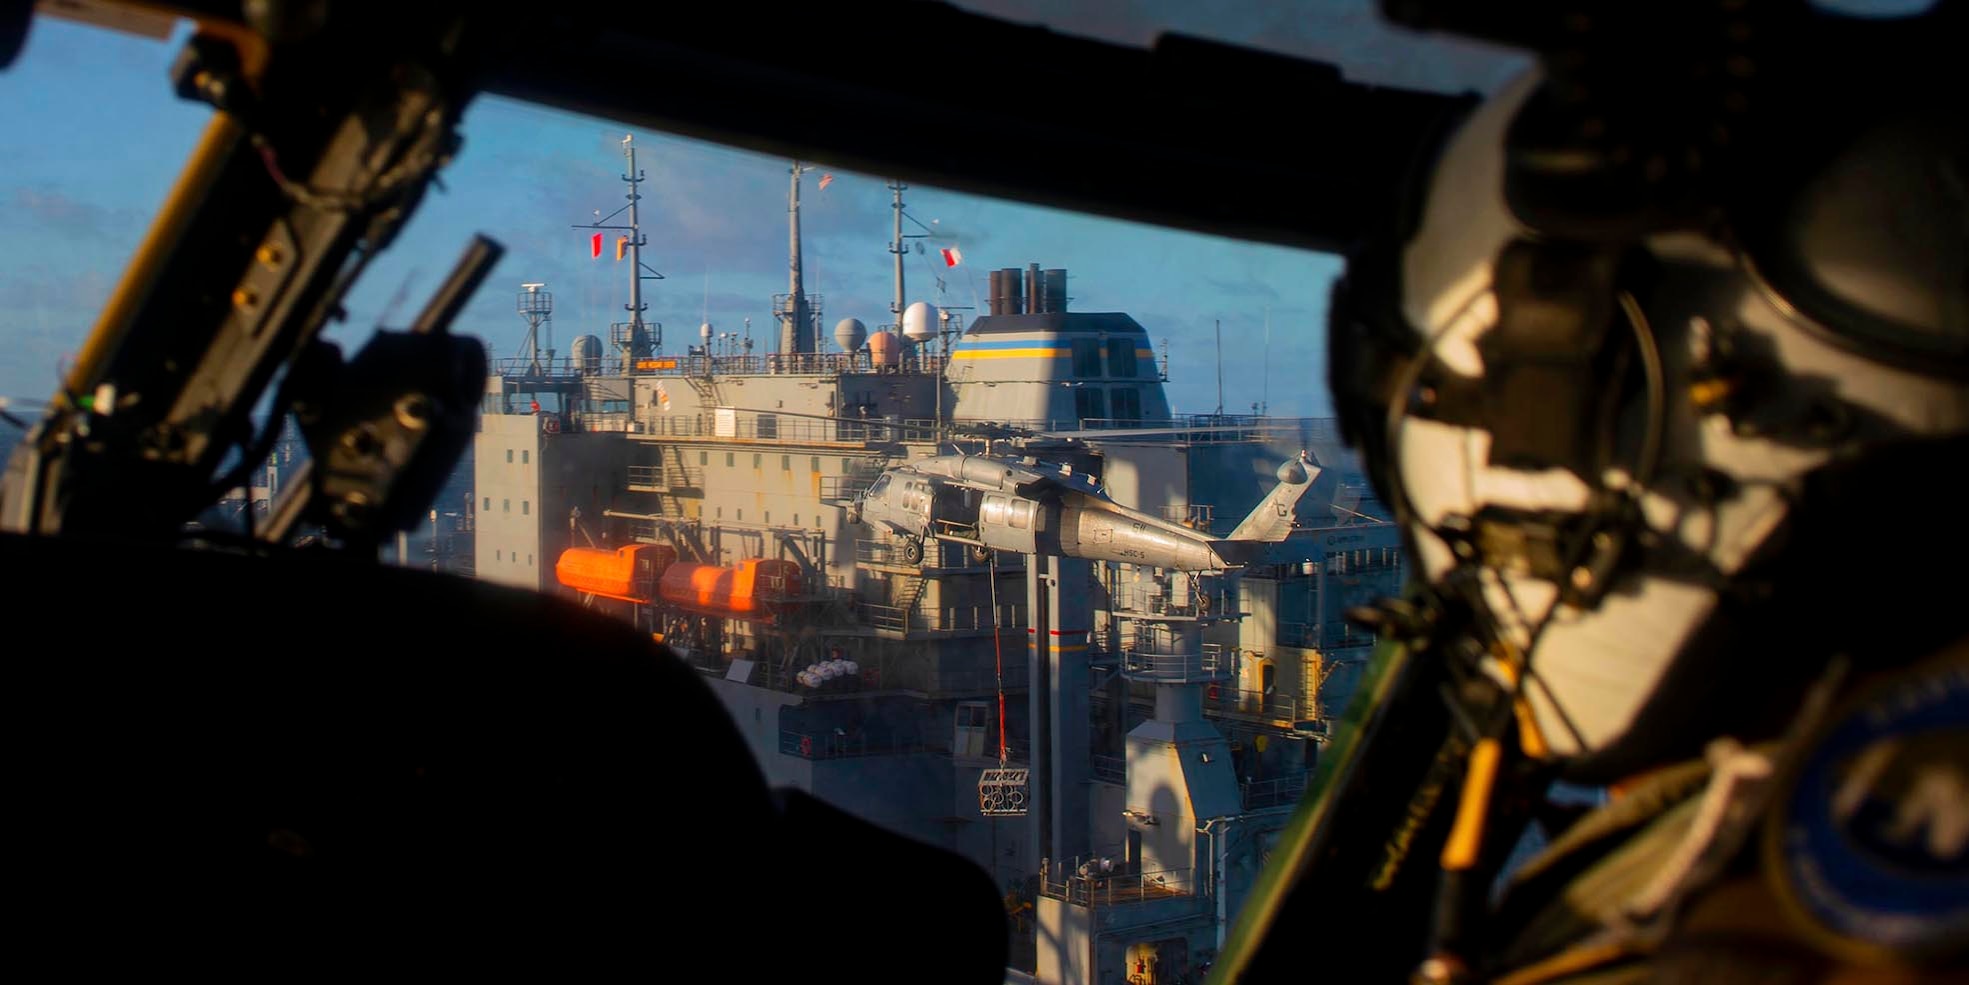 An MH-60S Knight Hawk helicopter, attached to Helicopter Sea Combat Squadron (HSC) 5, receives ammunition from the dry cargo and ammunition ship USNS Medgar Evers (T-AKE 13), Feb. 4, 2022.